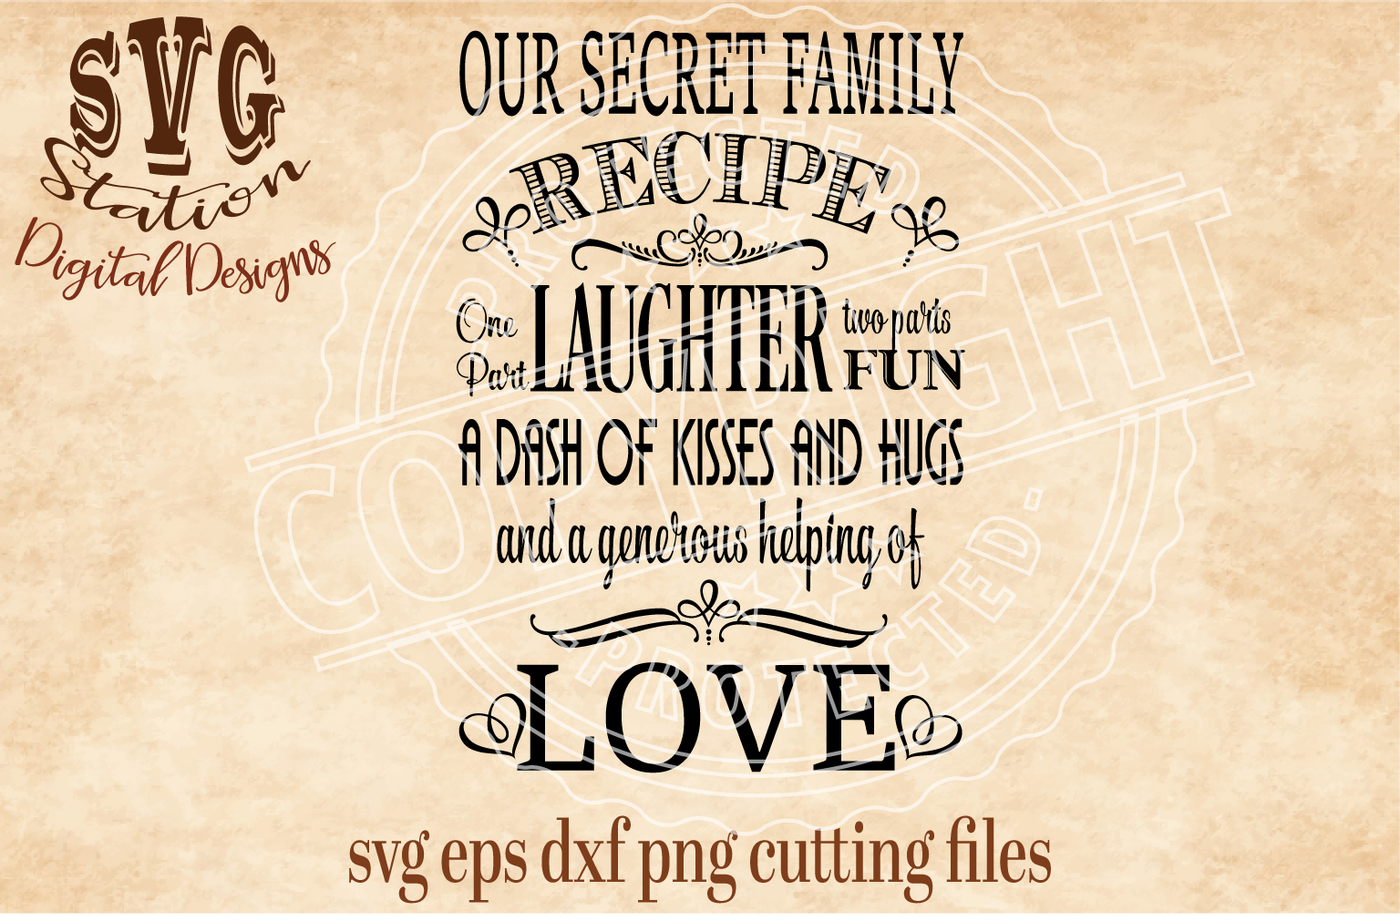 Download Home Decor Svg Family Reunion Svg Family Svg Family Love Cut File Family Quote Family Recipe Svg Family Cut File Family Love Svg Clip Art Art Collectibles